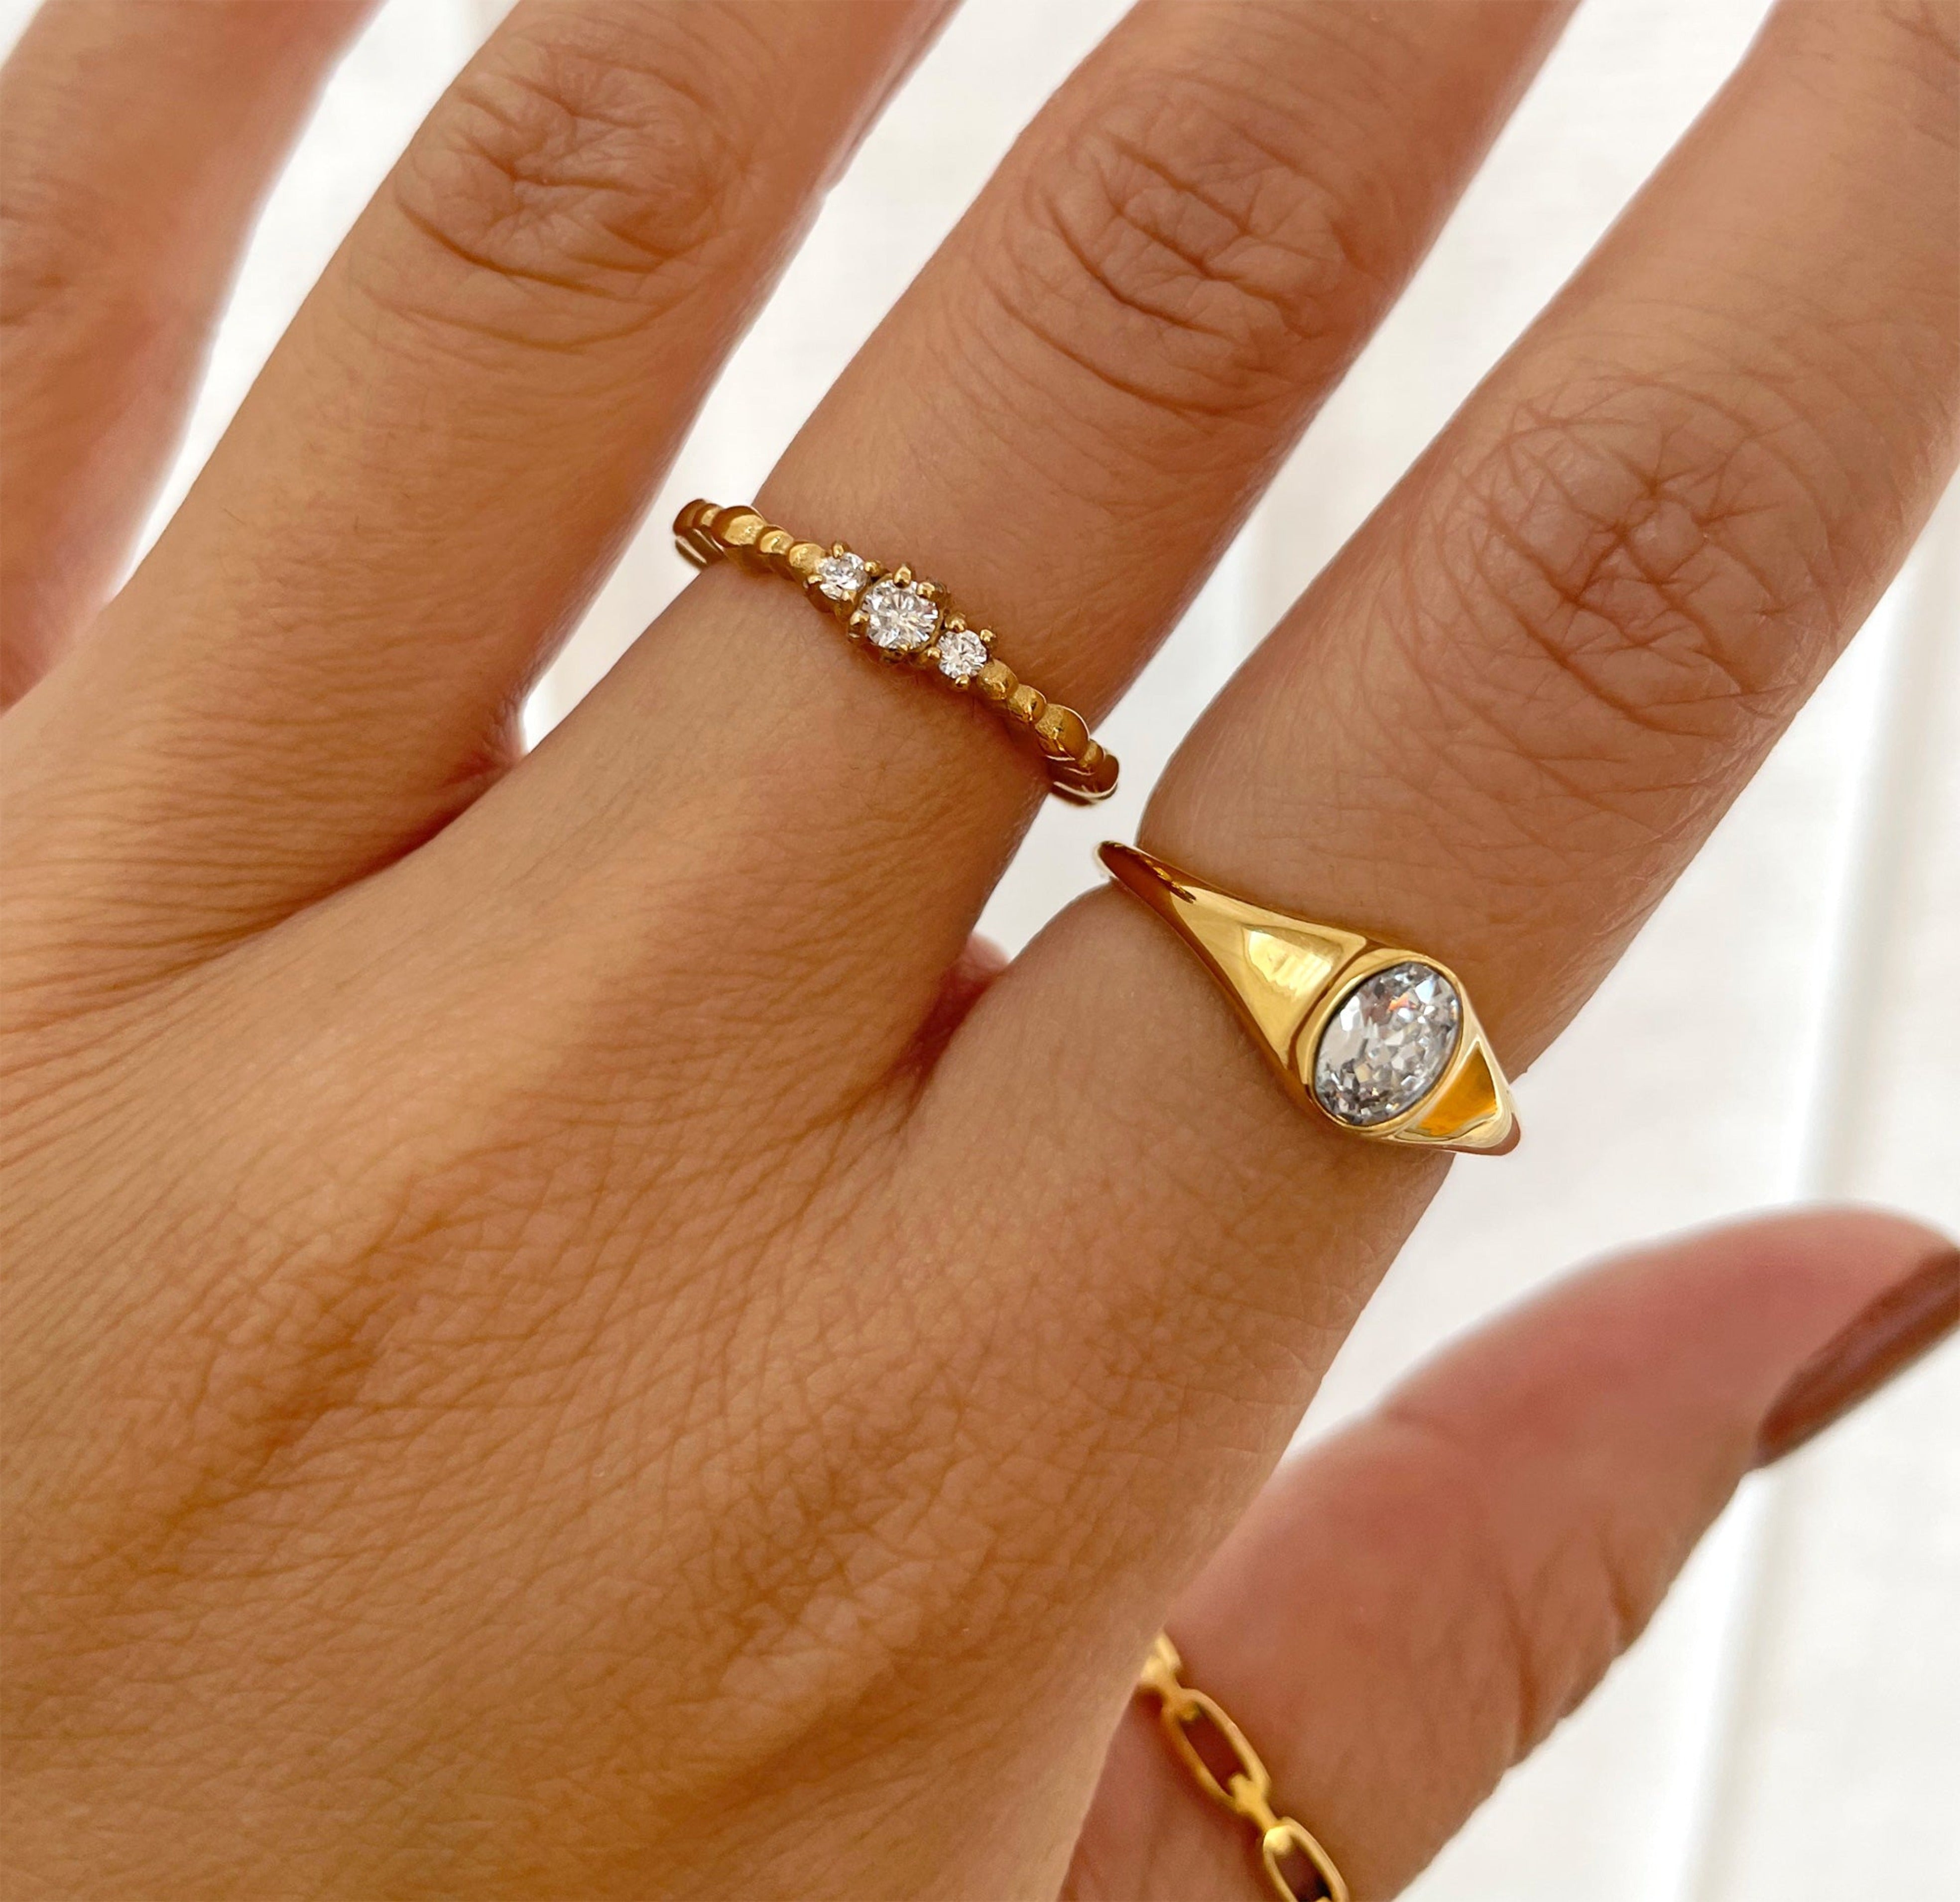 Jeanie gold oval stone ring paired with Celeste dainty trim stone ring. Waterproof jewelry